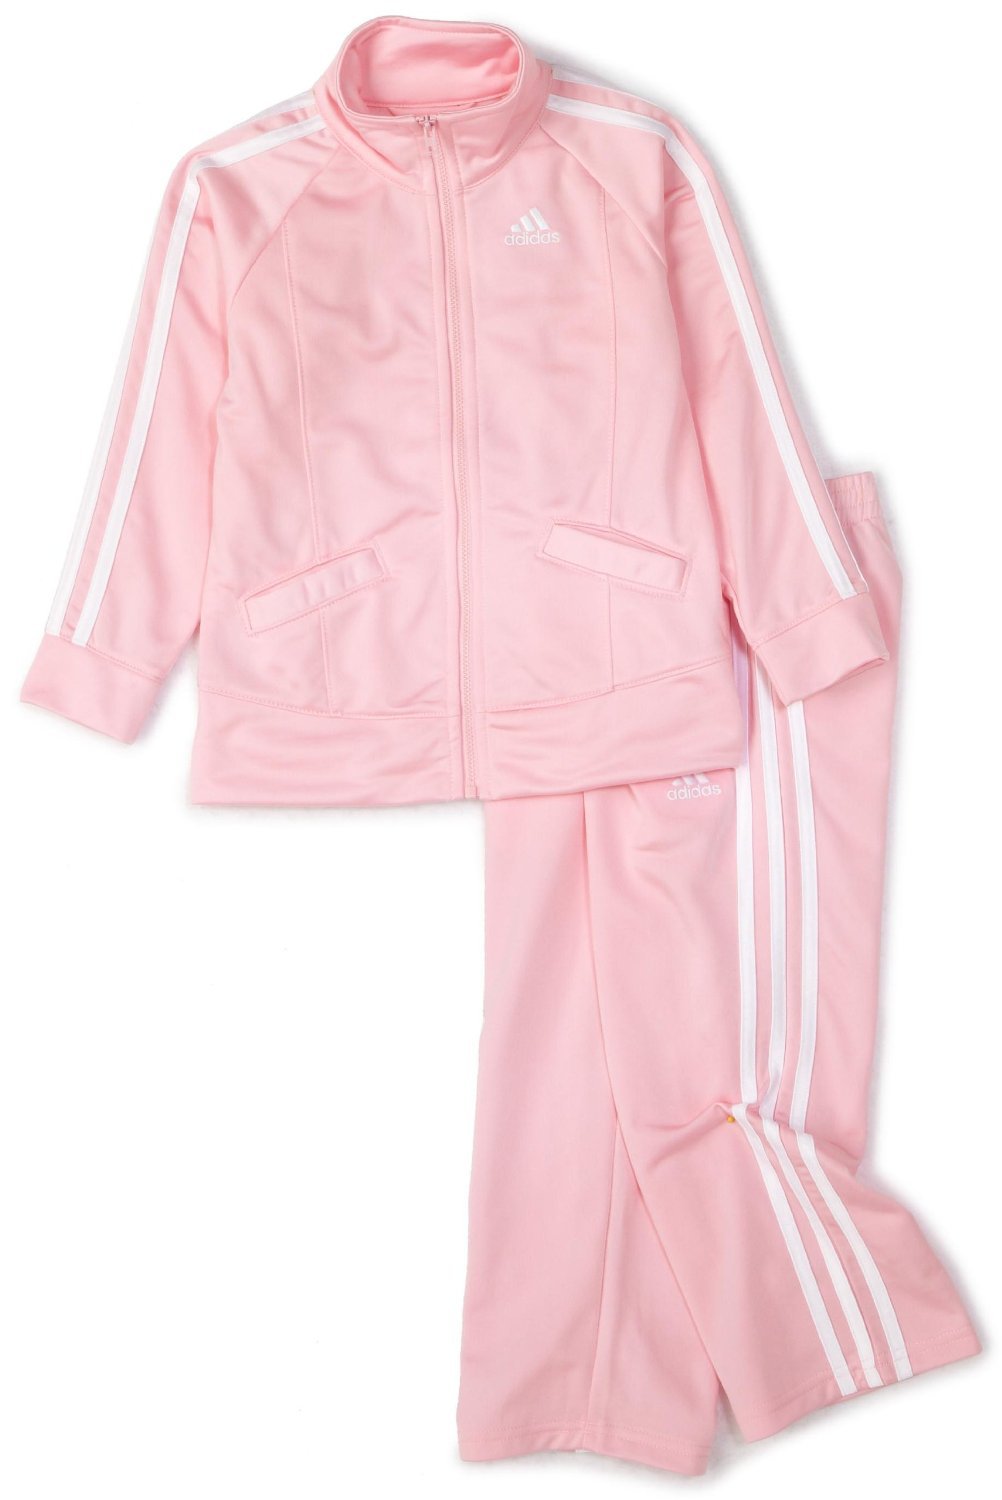 Adidas Baby Girl Track Suit Light Pink